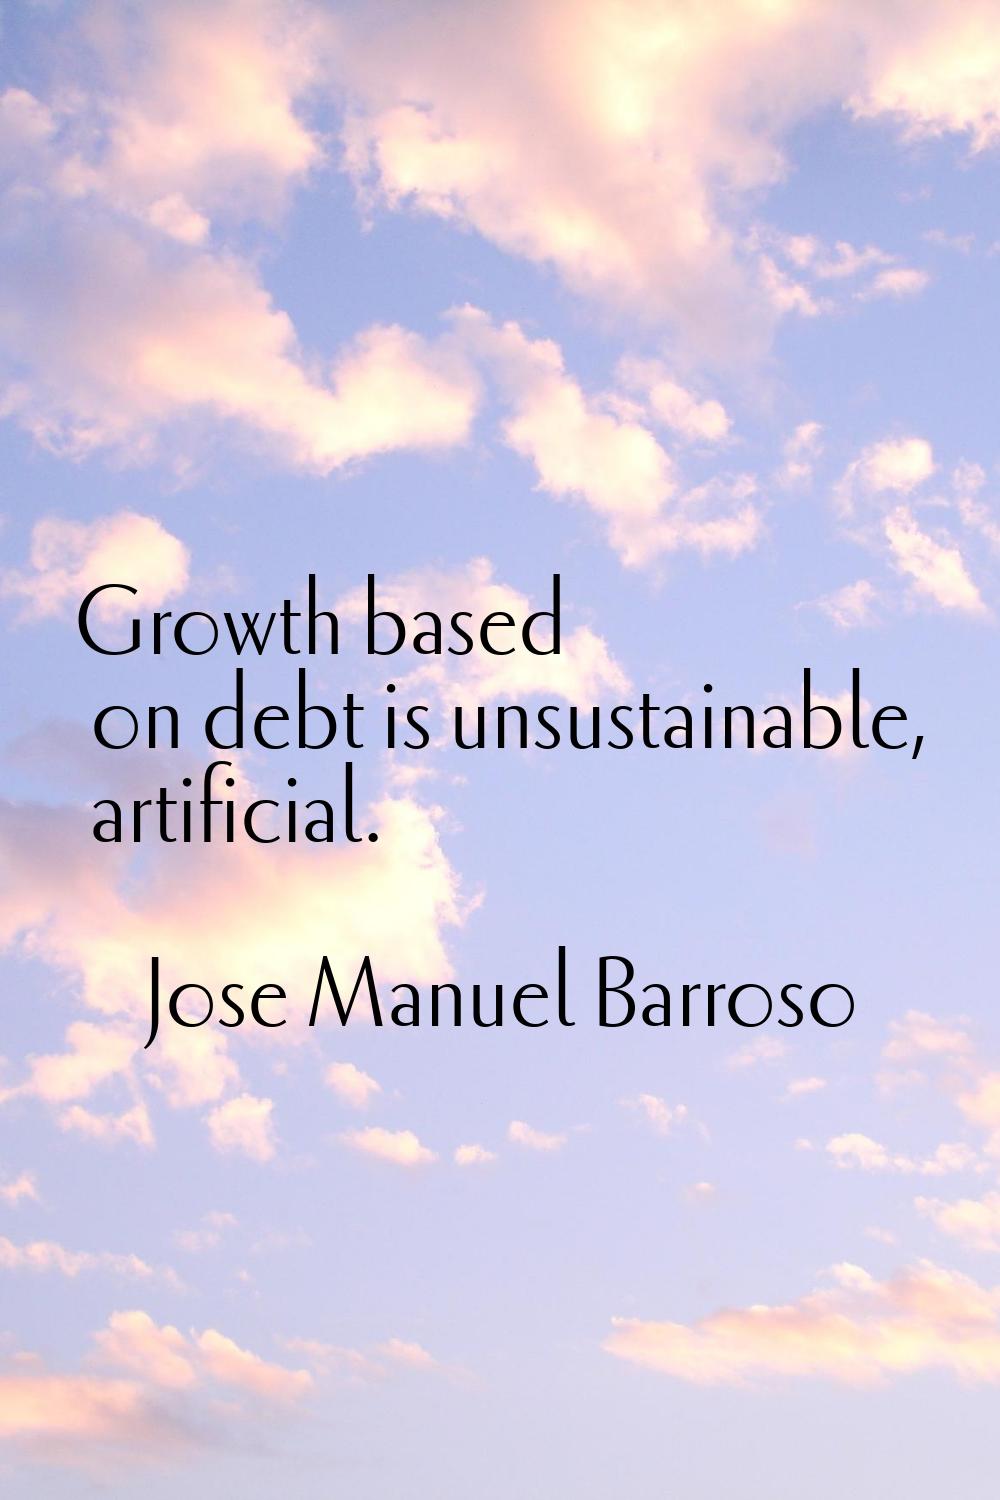 Growth based on debt is unsustainable, artificial.